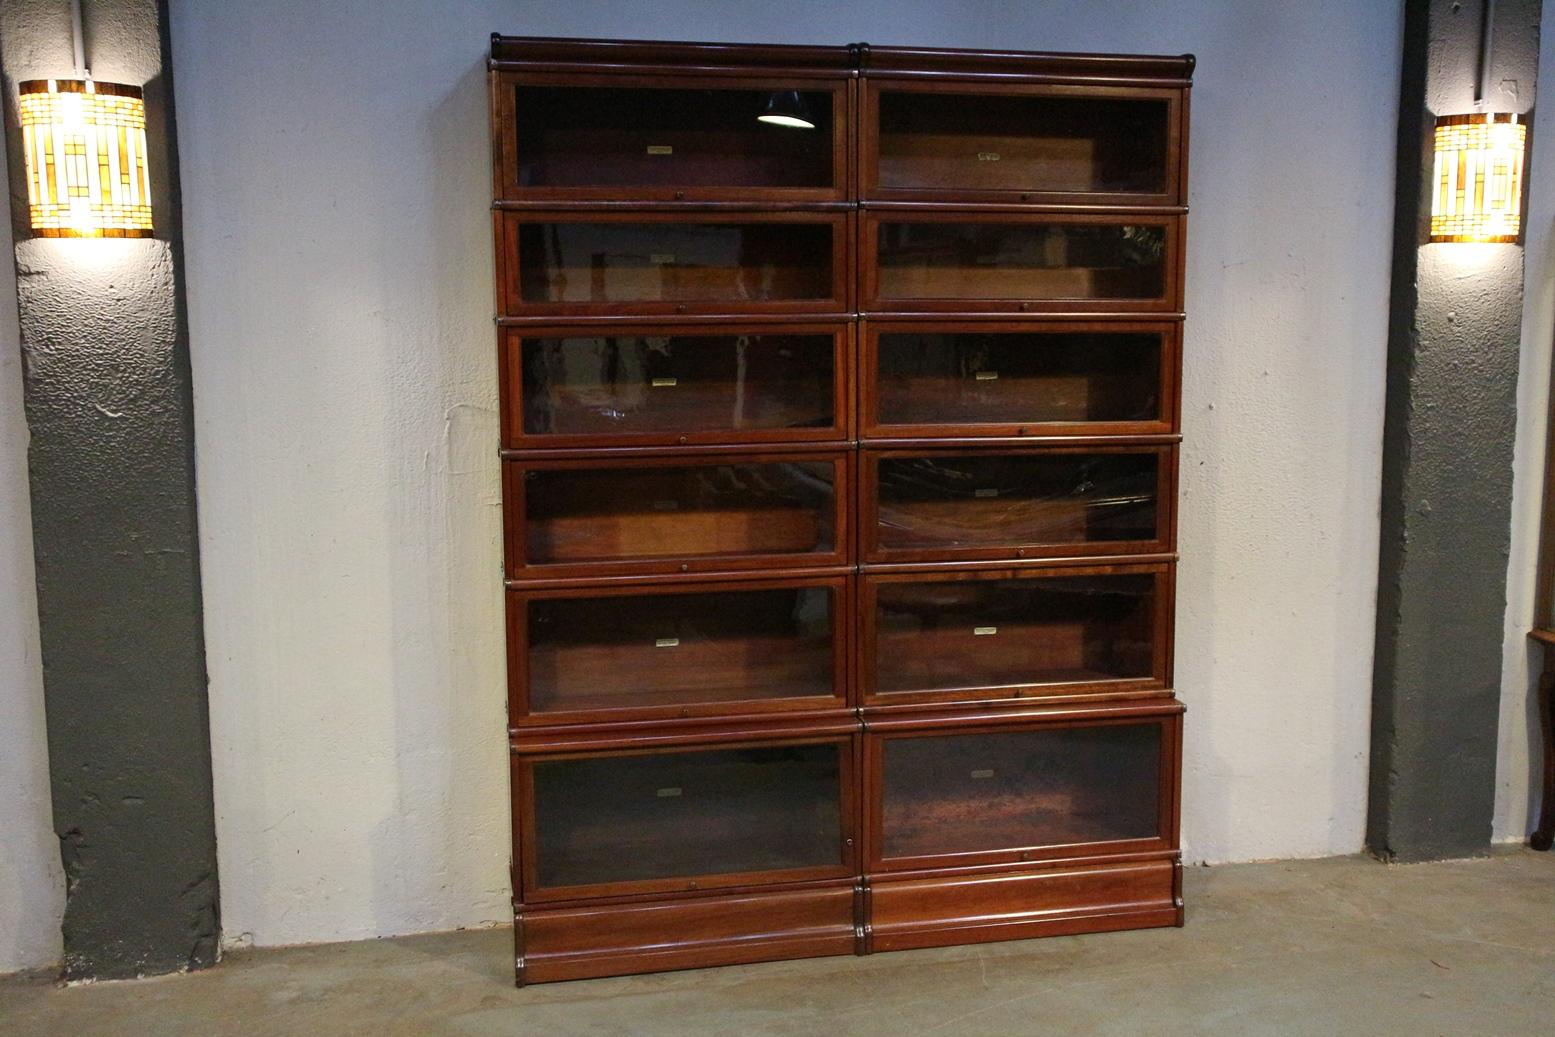 Beautiful antique mahogany Globe Wernicke bookcase. Entirely in perfect condition. The cabinet is made up of 12 stackable elements. Where the lower elements are deeper (file format). Cabinets can be used for multiple purposes. As a bookcase, display